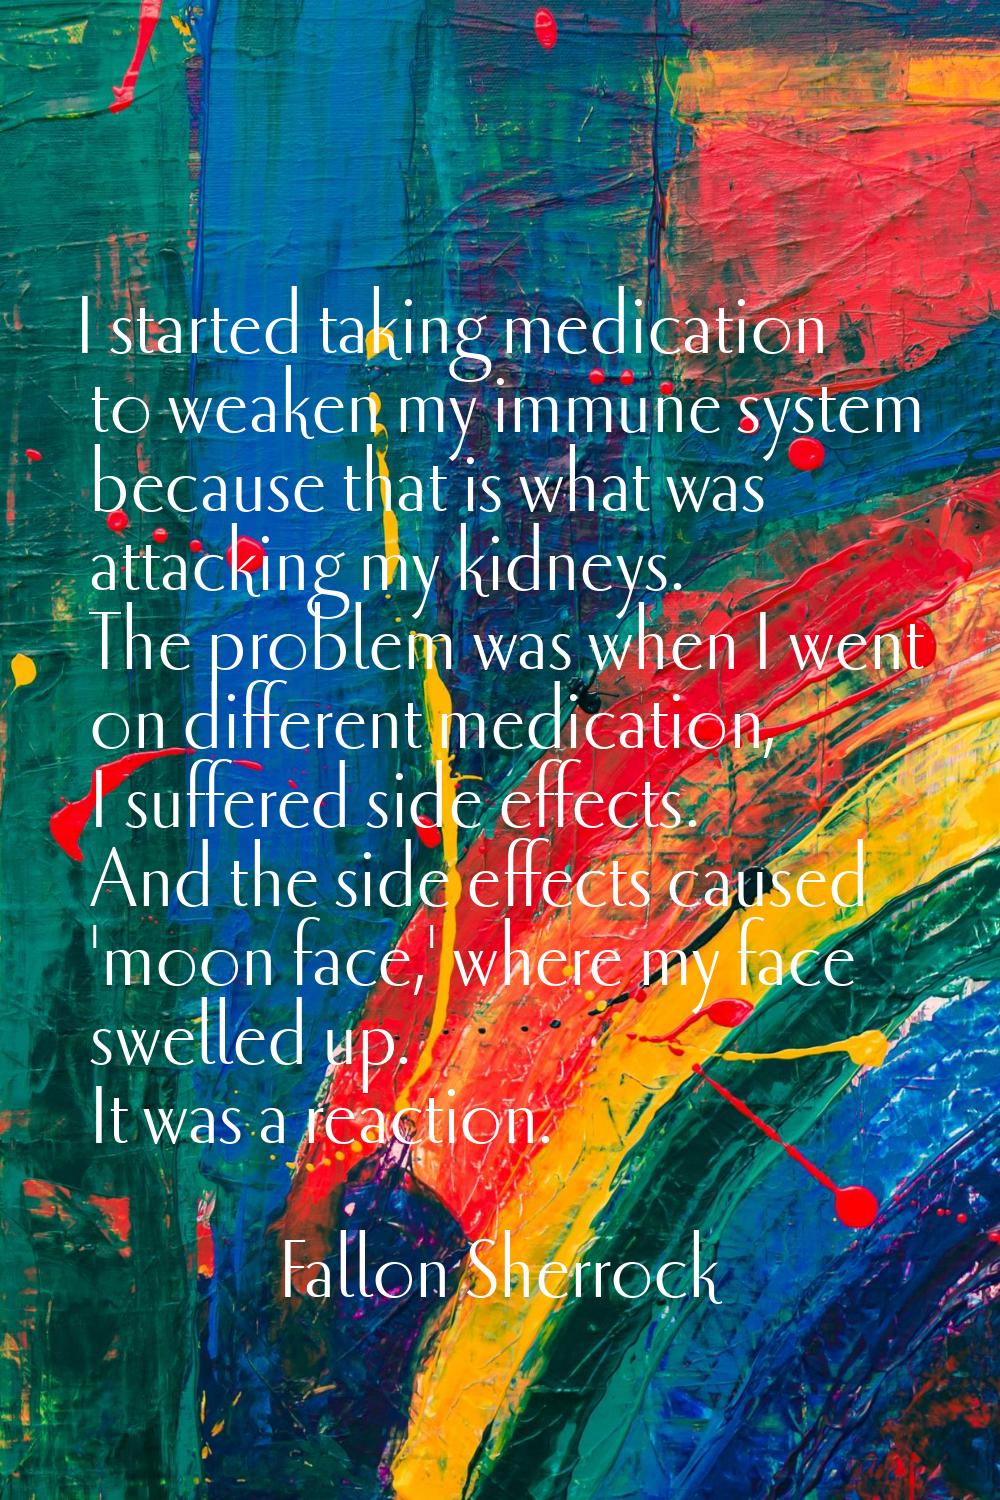 I started taking medication to weaken my immune system because that is what was attacking my kidney